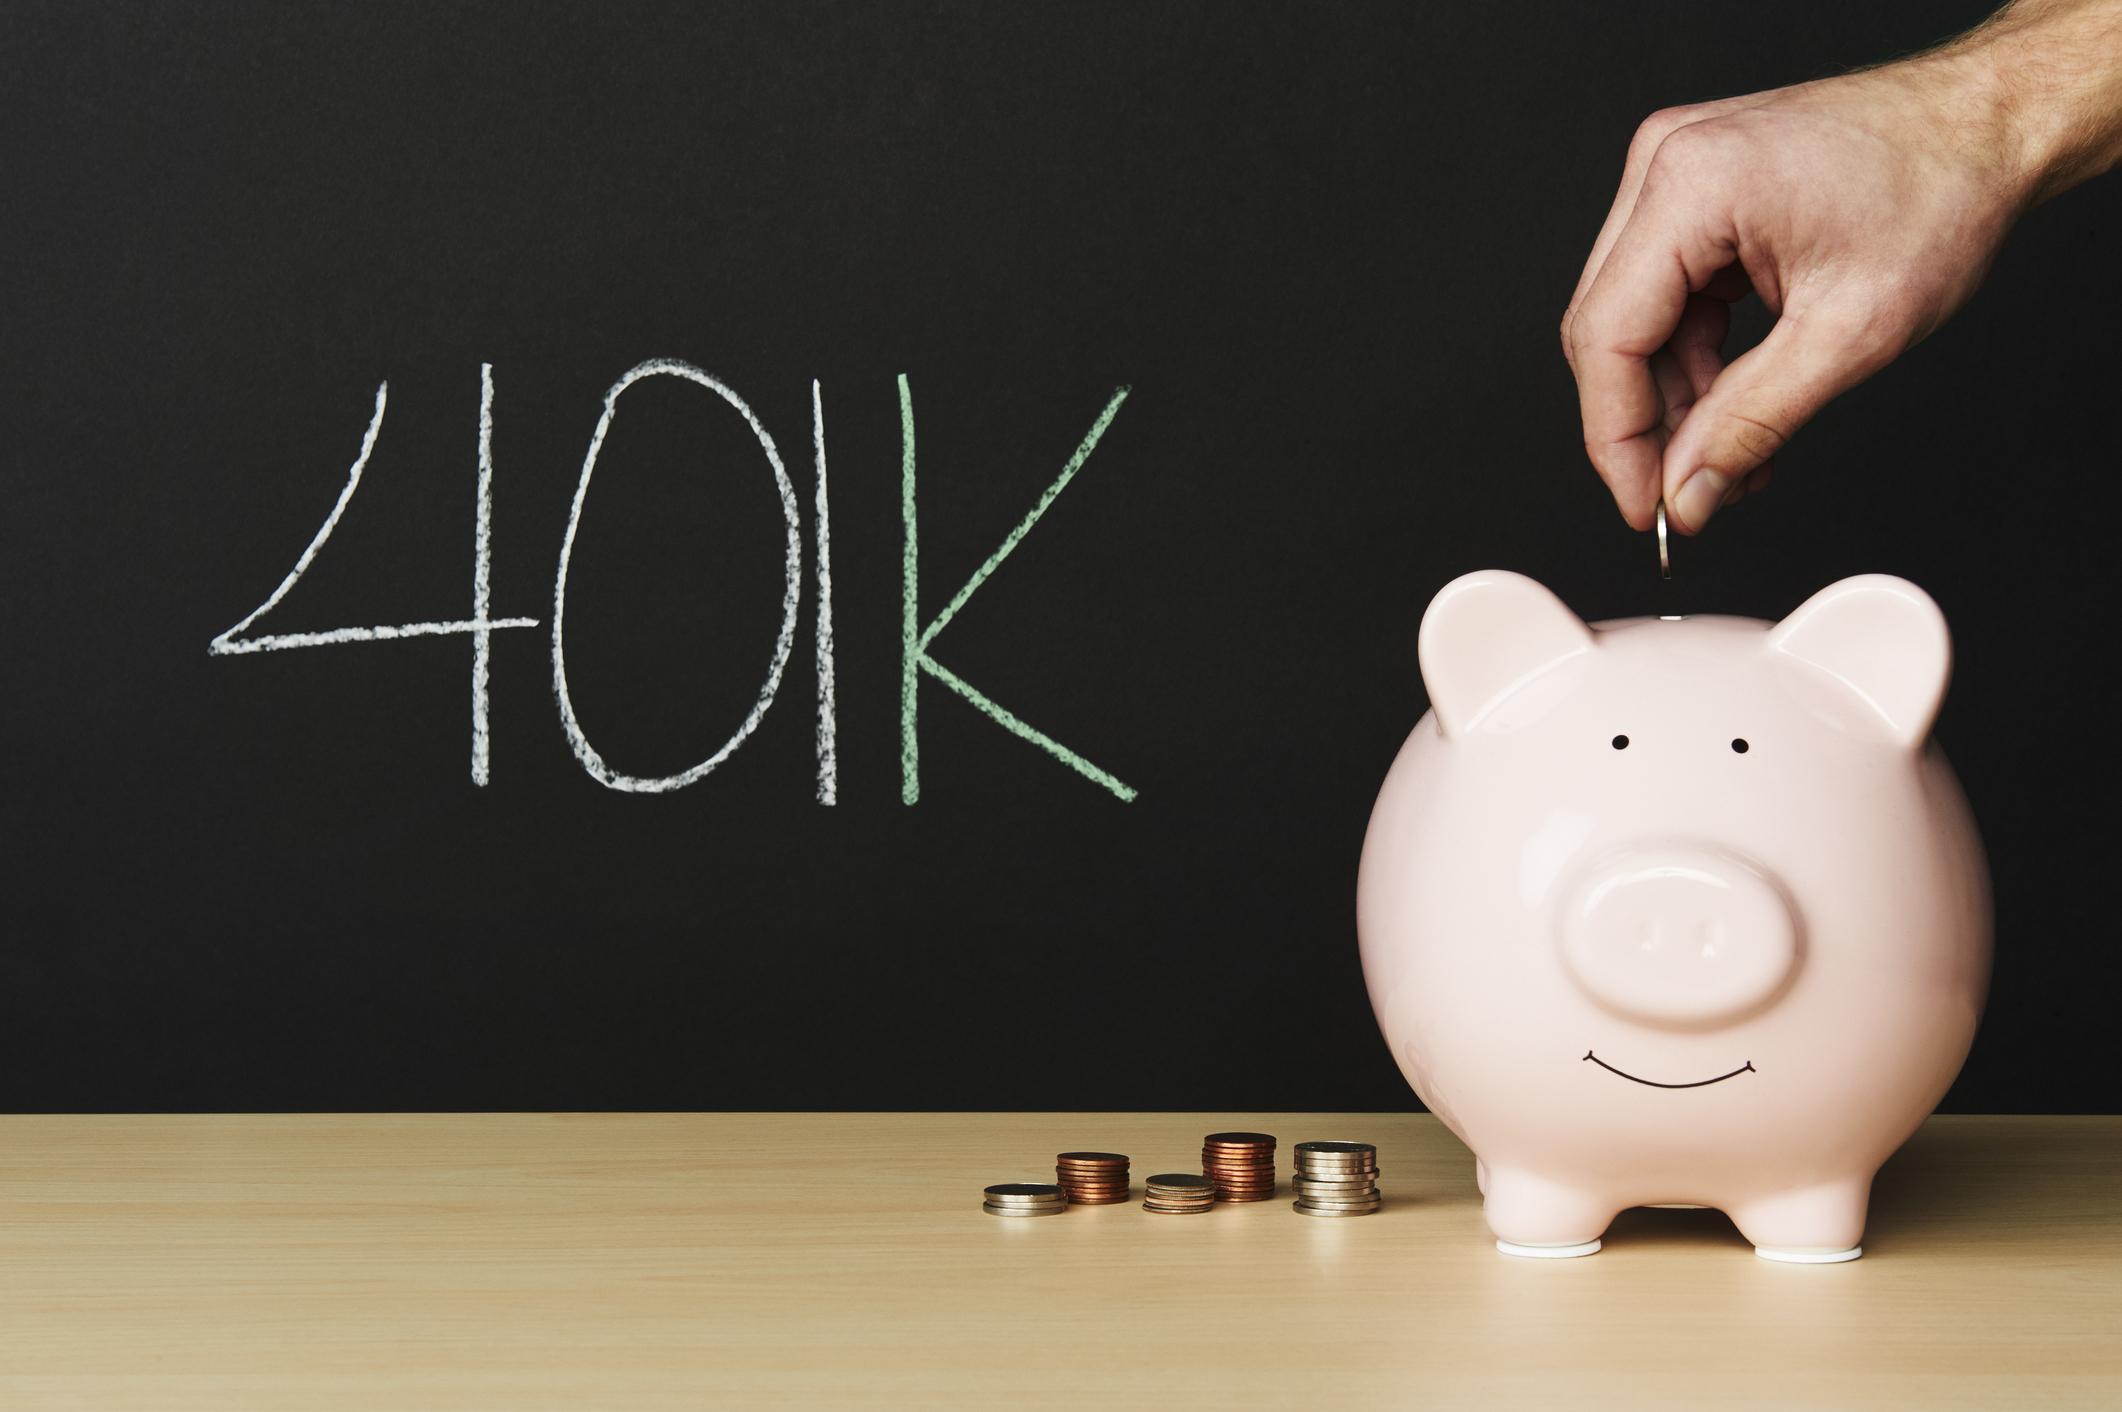 What Should I Do With My 401k? â Dream Financial Planning